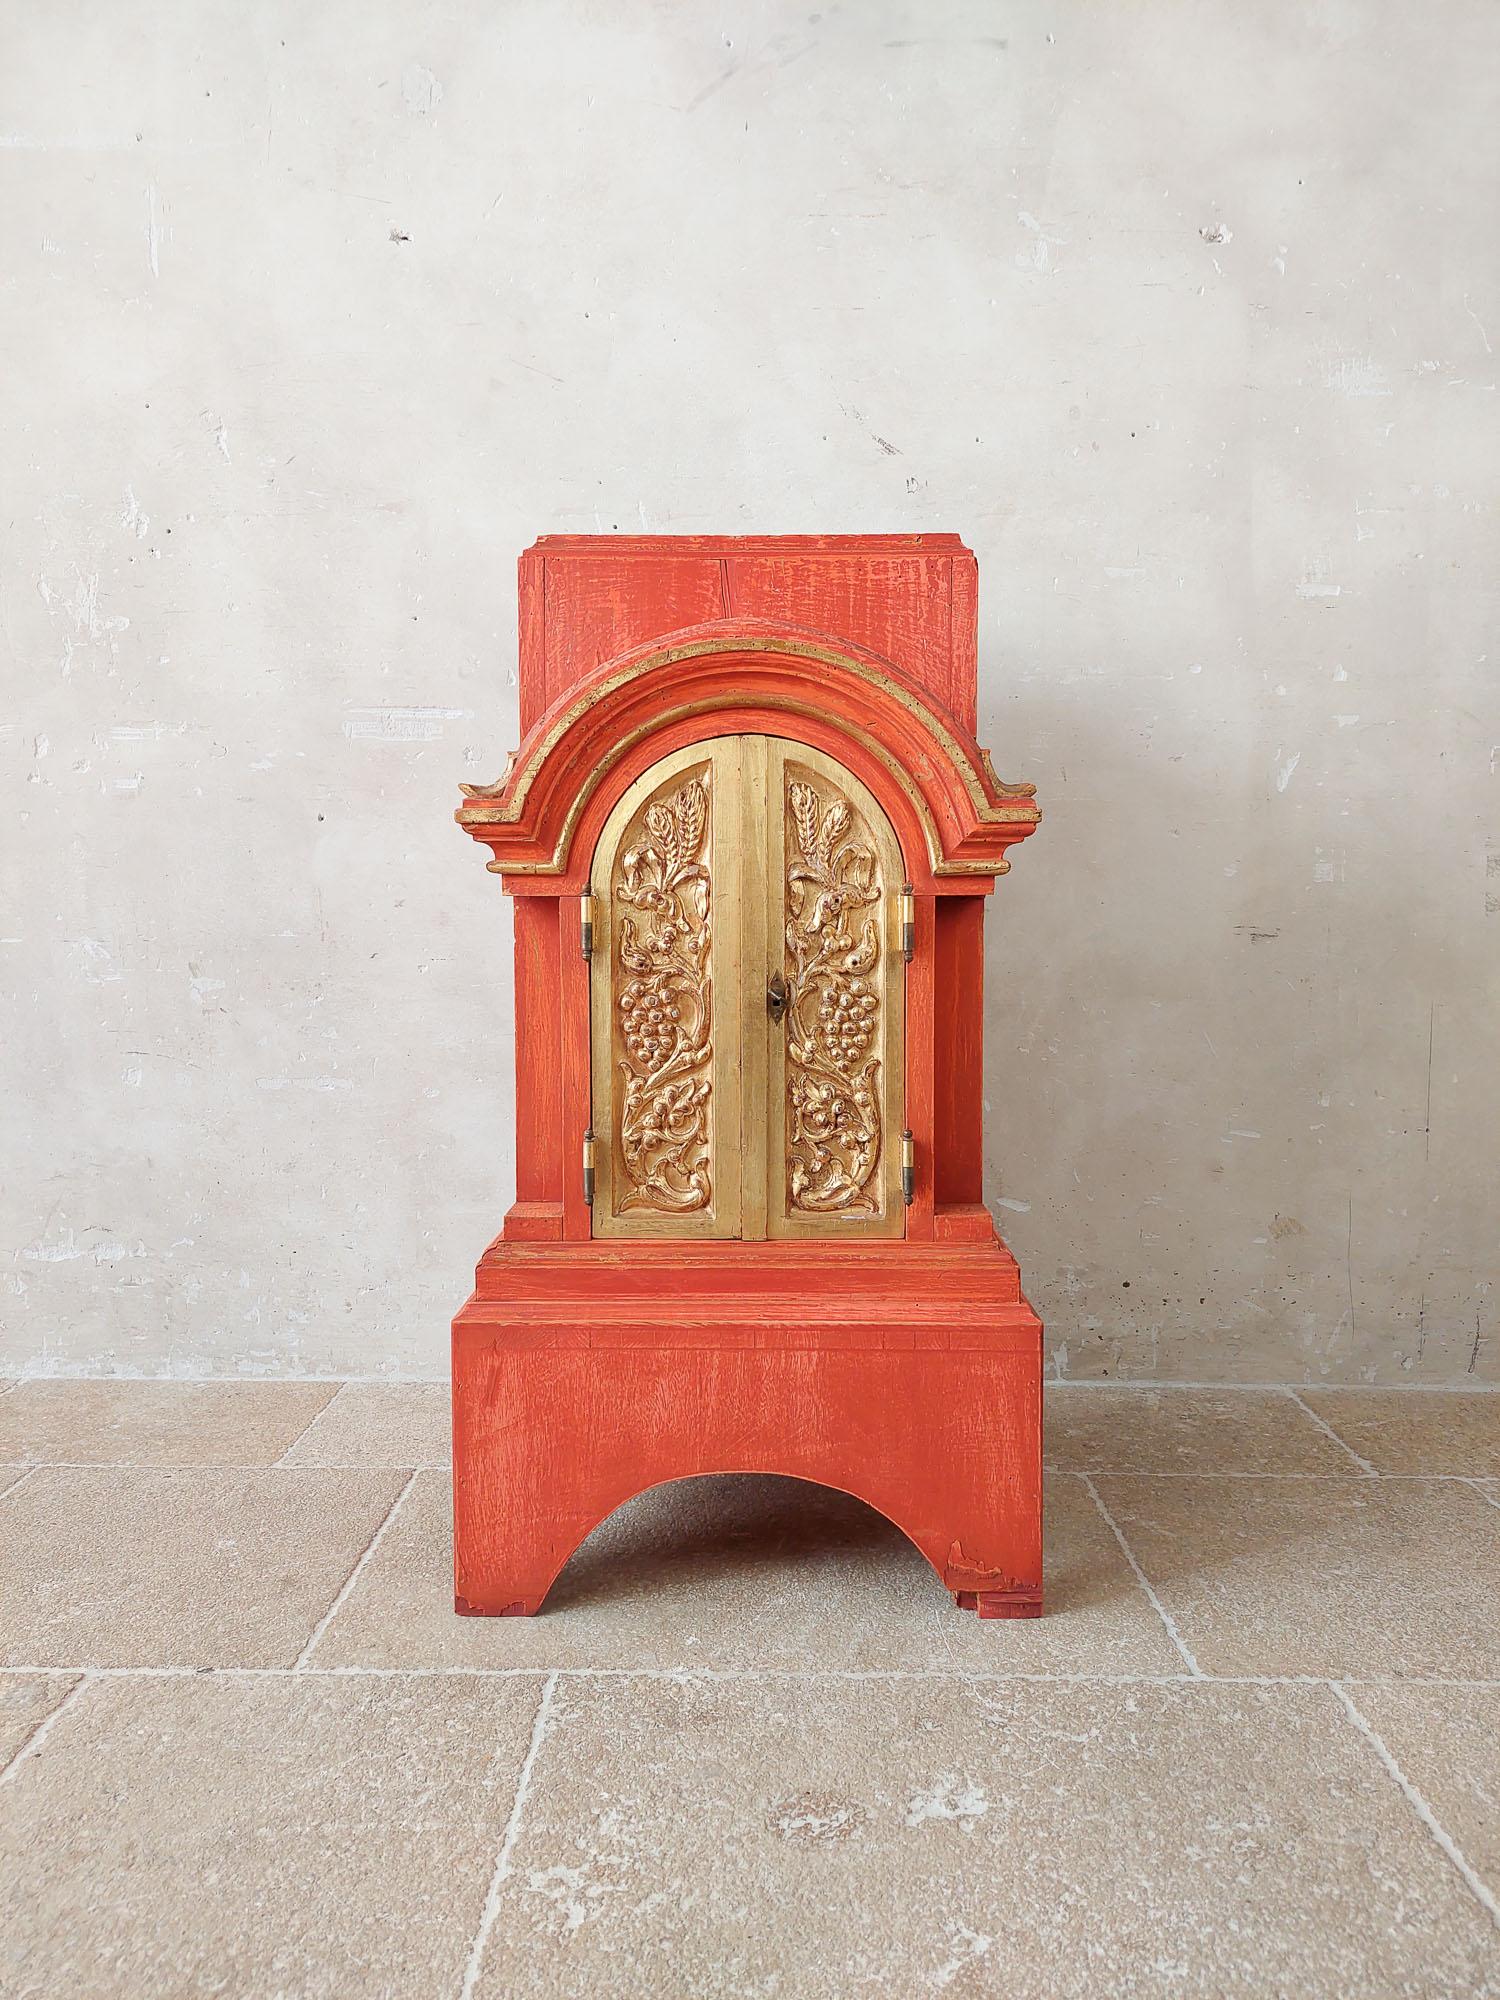 Antique table altar or tabernacle, patinated in orange terra color with golden doors.

h 95 x w 50 x d 47 cm